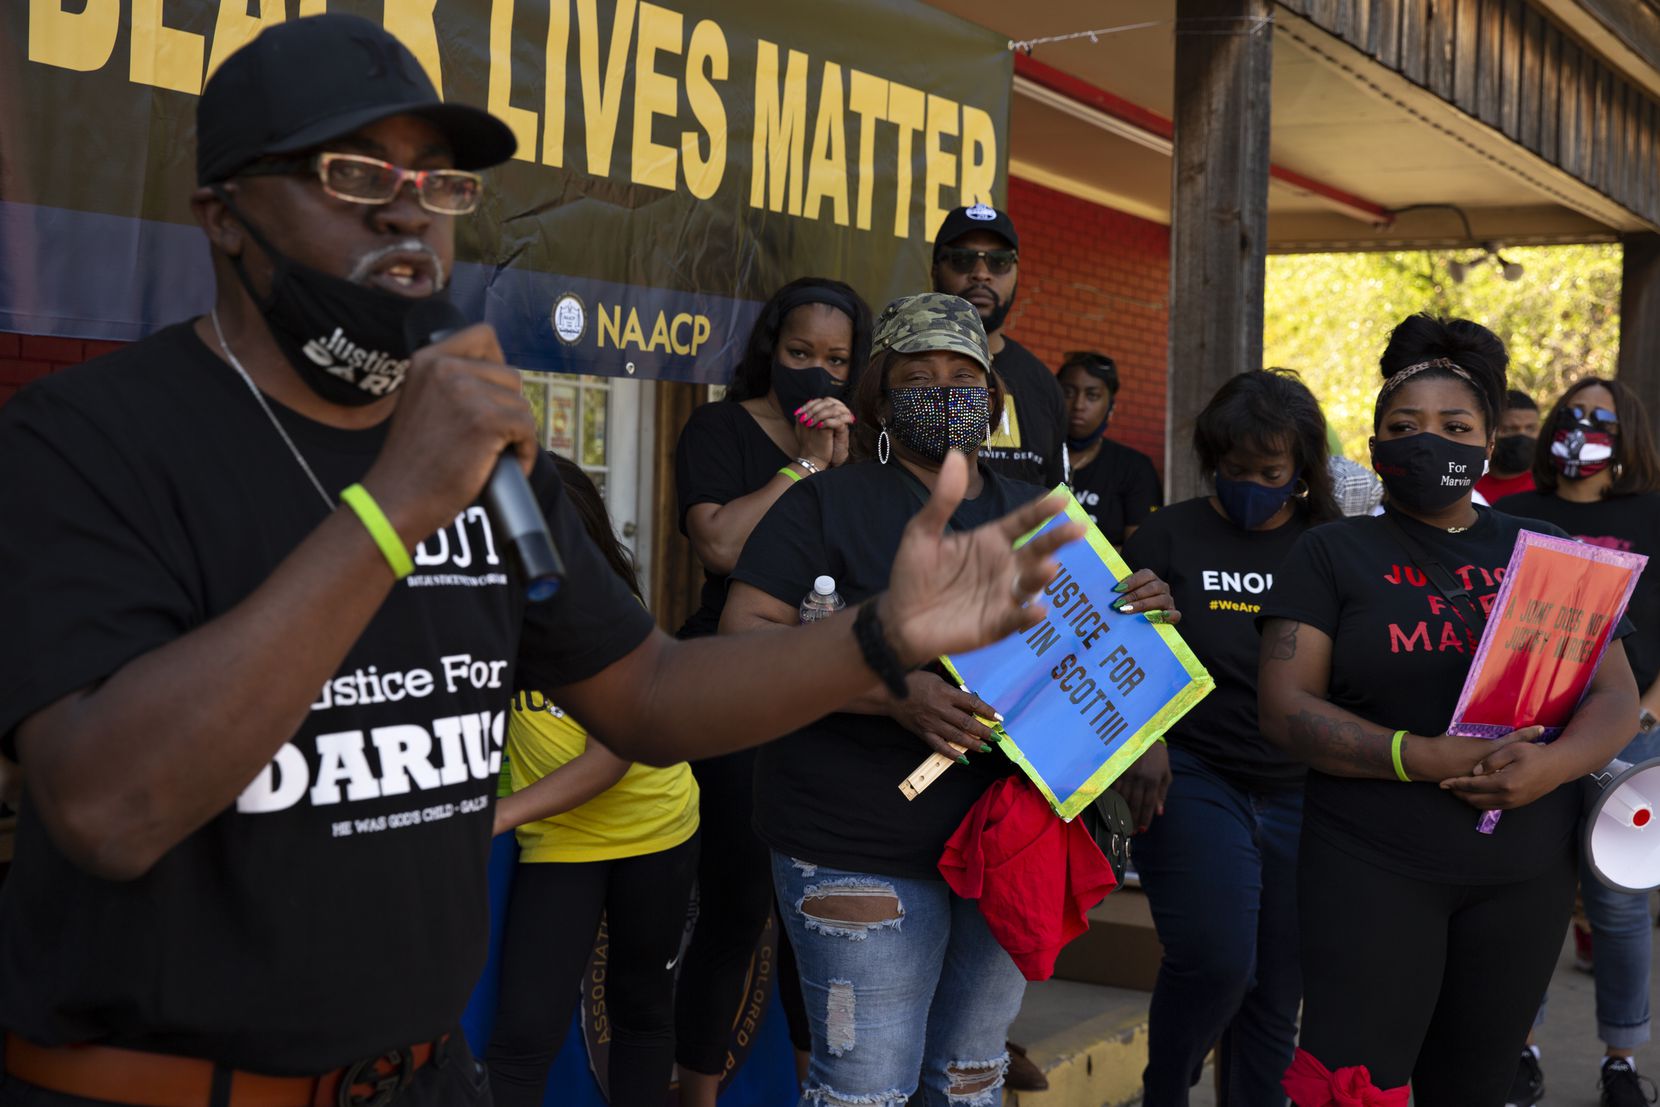 The families of Marvin Scott III and Rodney Reese listen to Kevin Tarver, father of Darius Tarver who was fatally shot by  Denton police, speak at a demonstration in Allen held by the Collin County NAACP advocating justice for Marvin Scott III on April 11, 2020.  (Shelby Tauber/Special Contributor)